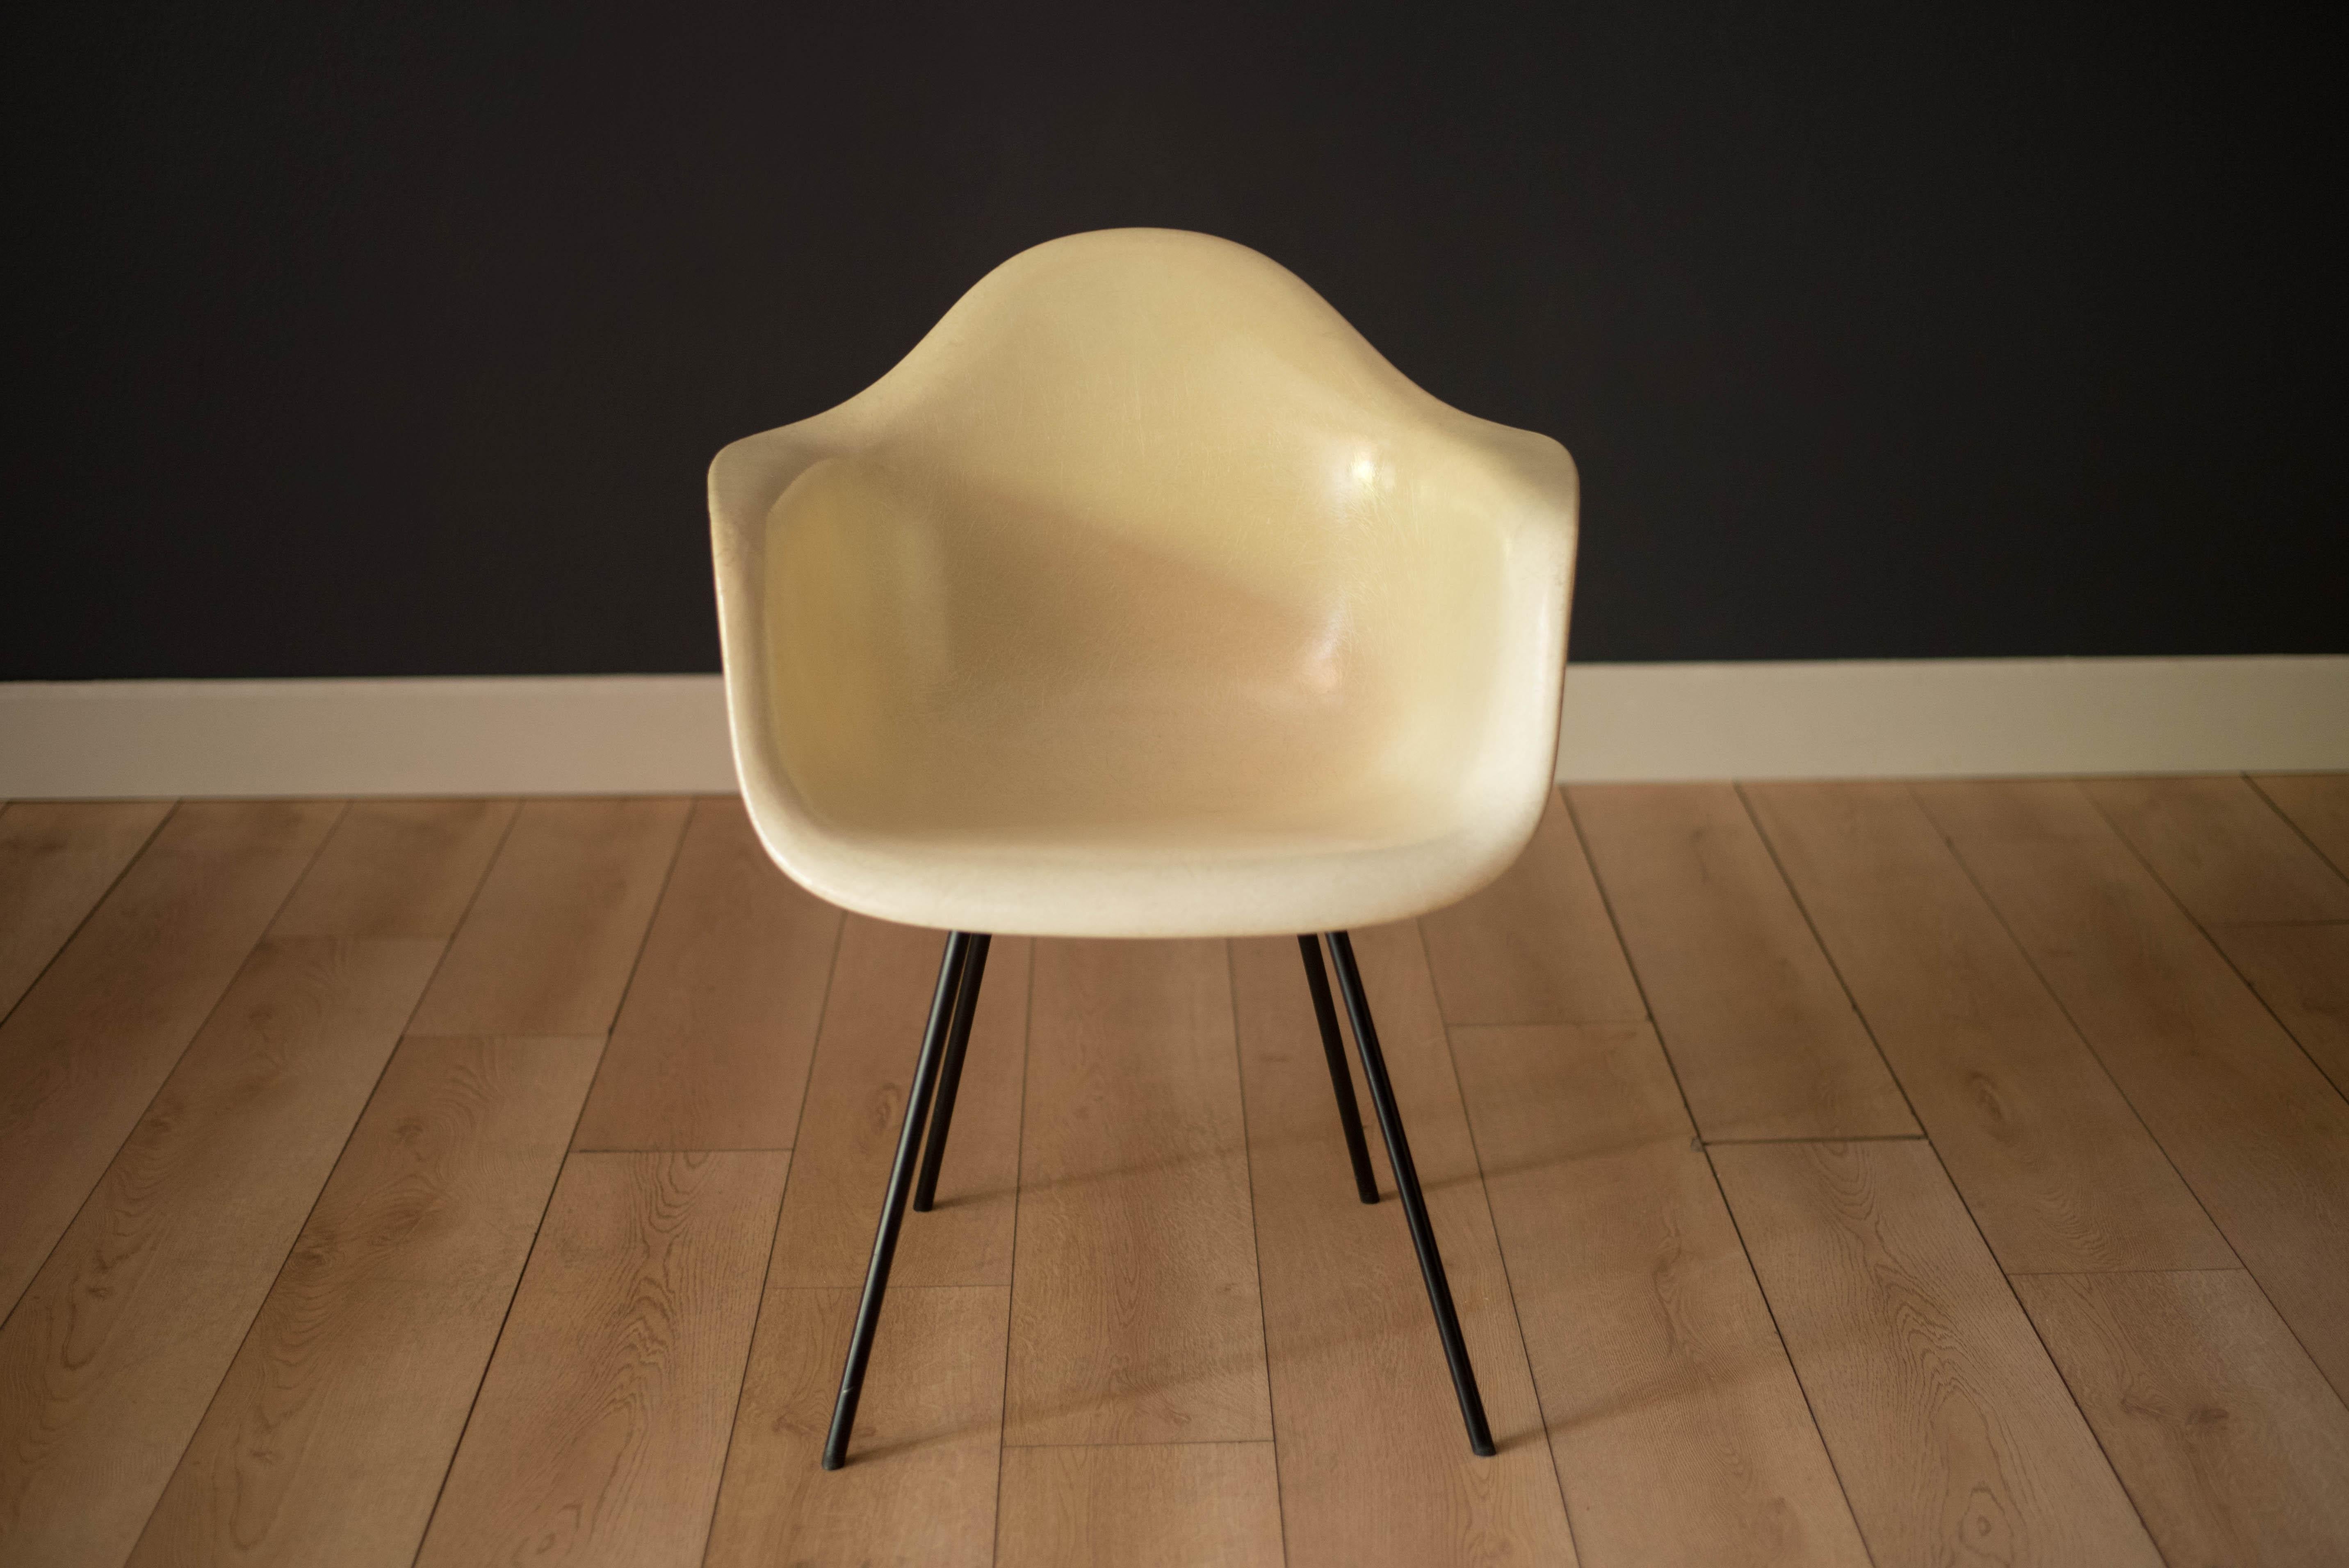 Iconic design (DAX) dining armchair x-base by Ray and Charles Eames, circa early 1950's. This second generation parchment colored armchair retains a high gloss finish supported by the original black X steel base with large shock mounts. An earlier